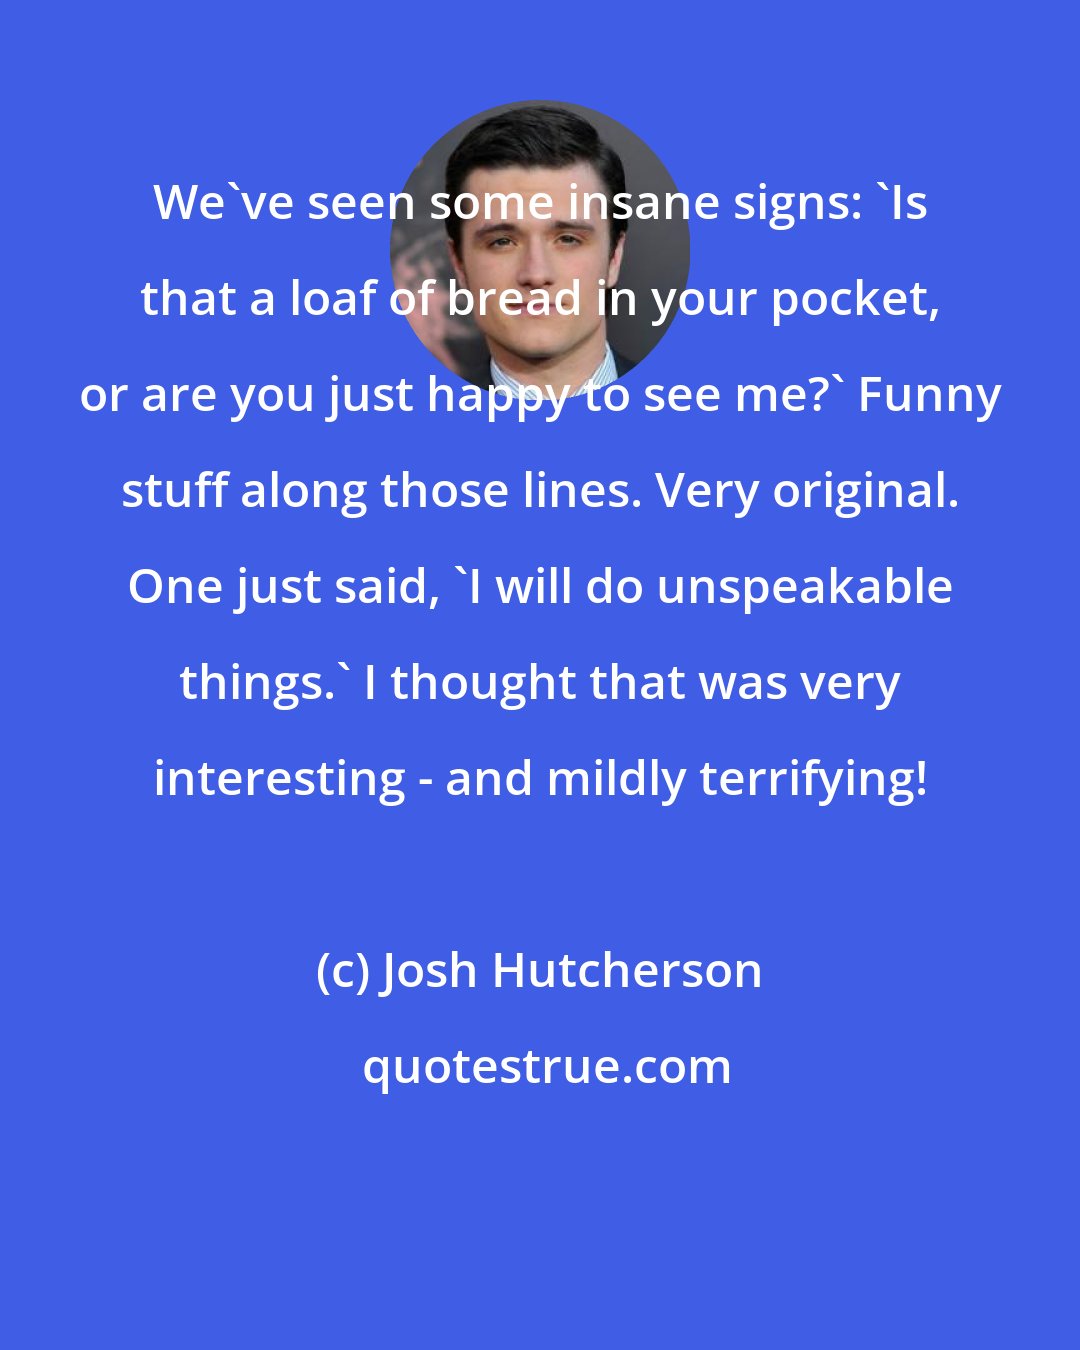 Josh Hutcherson: We've seen some insane signs: 'Is that a loaf of bread in your pocket, or are you just happy to see me?' Funny stuff along those lines. Very original. One just said, 'I will do unspeakable things.' I thought that was very interesting - and mildly terrifying!